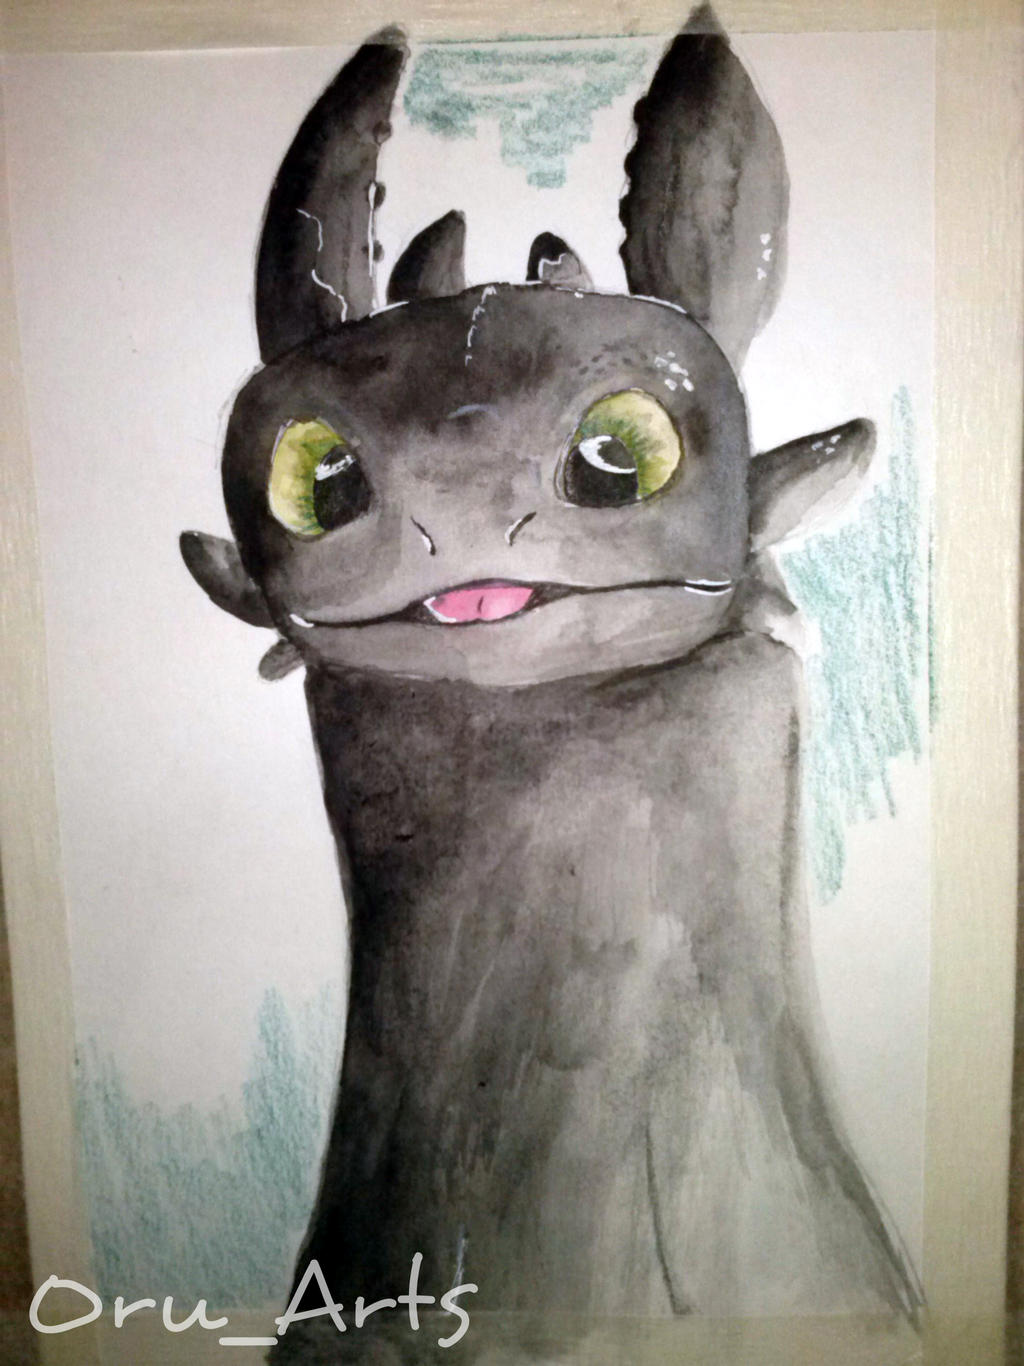 3. Toothless(How To Train Your Dragon)